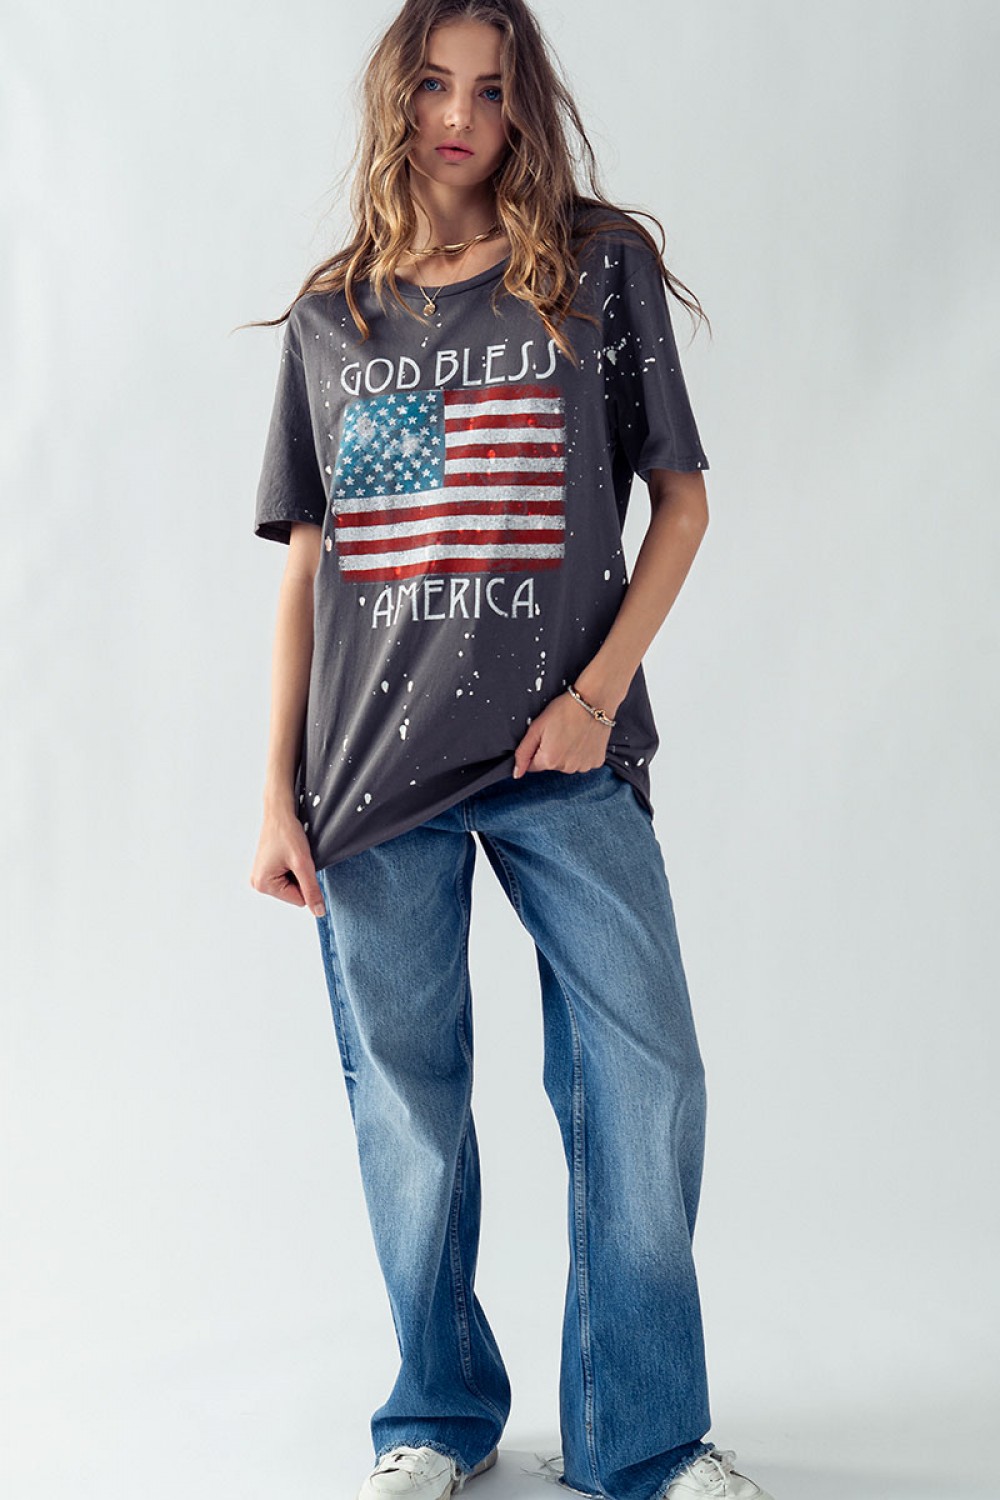 0789-5459<br/>BLAIRE GOD BLESS AMERICA TIE DYE TOP